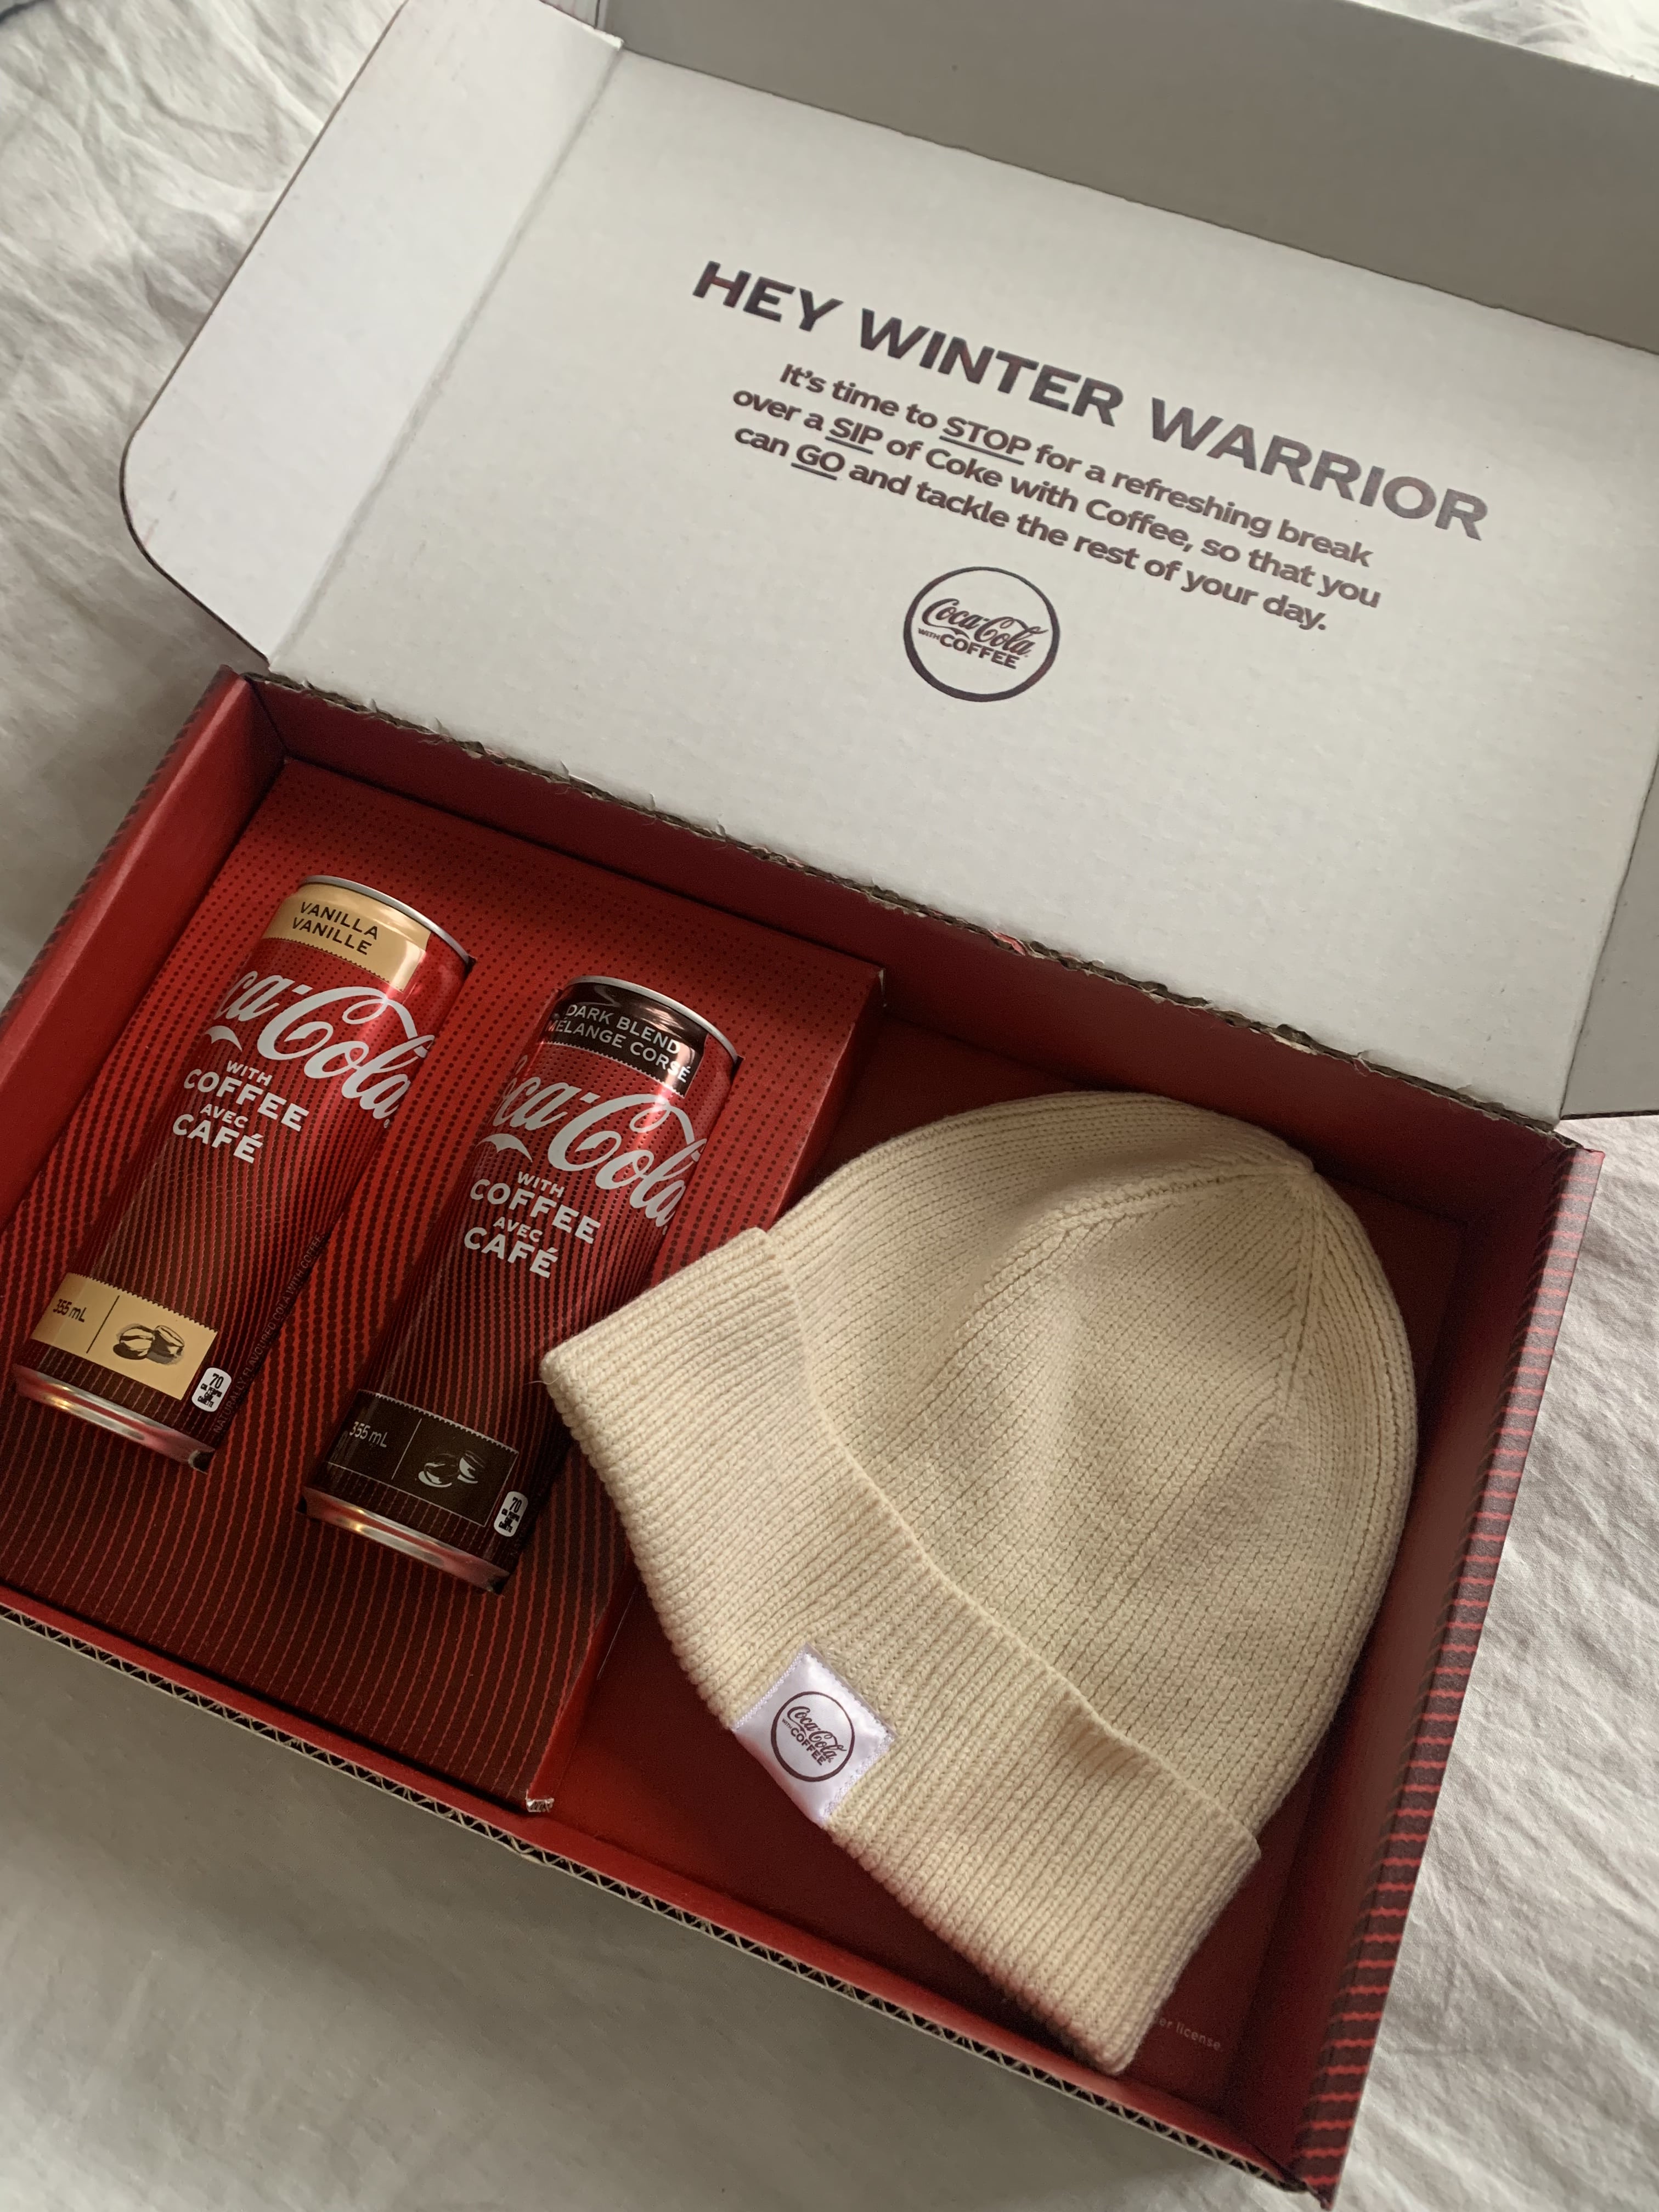 Merchandise box with cans of Coke and a toque